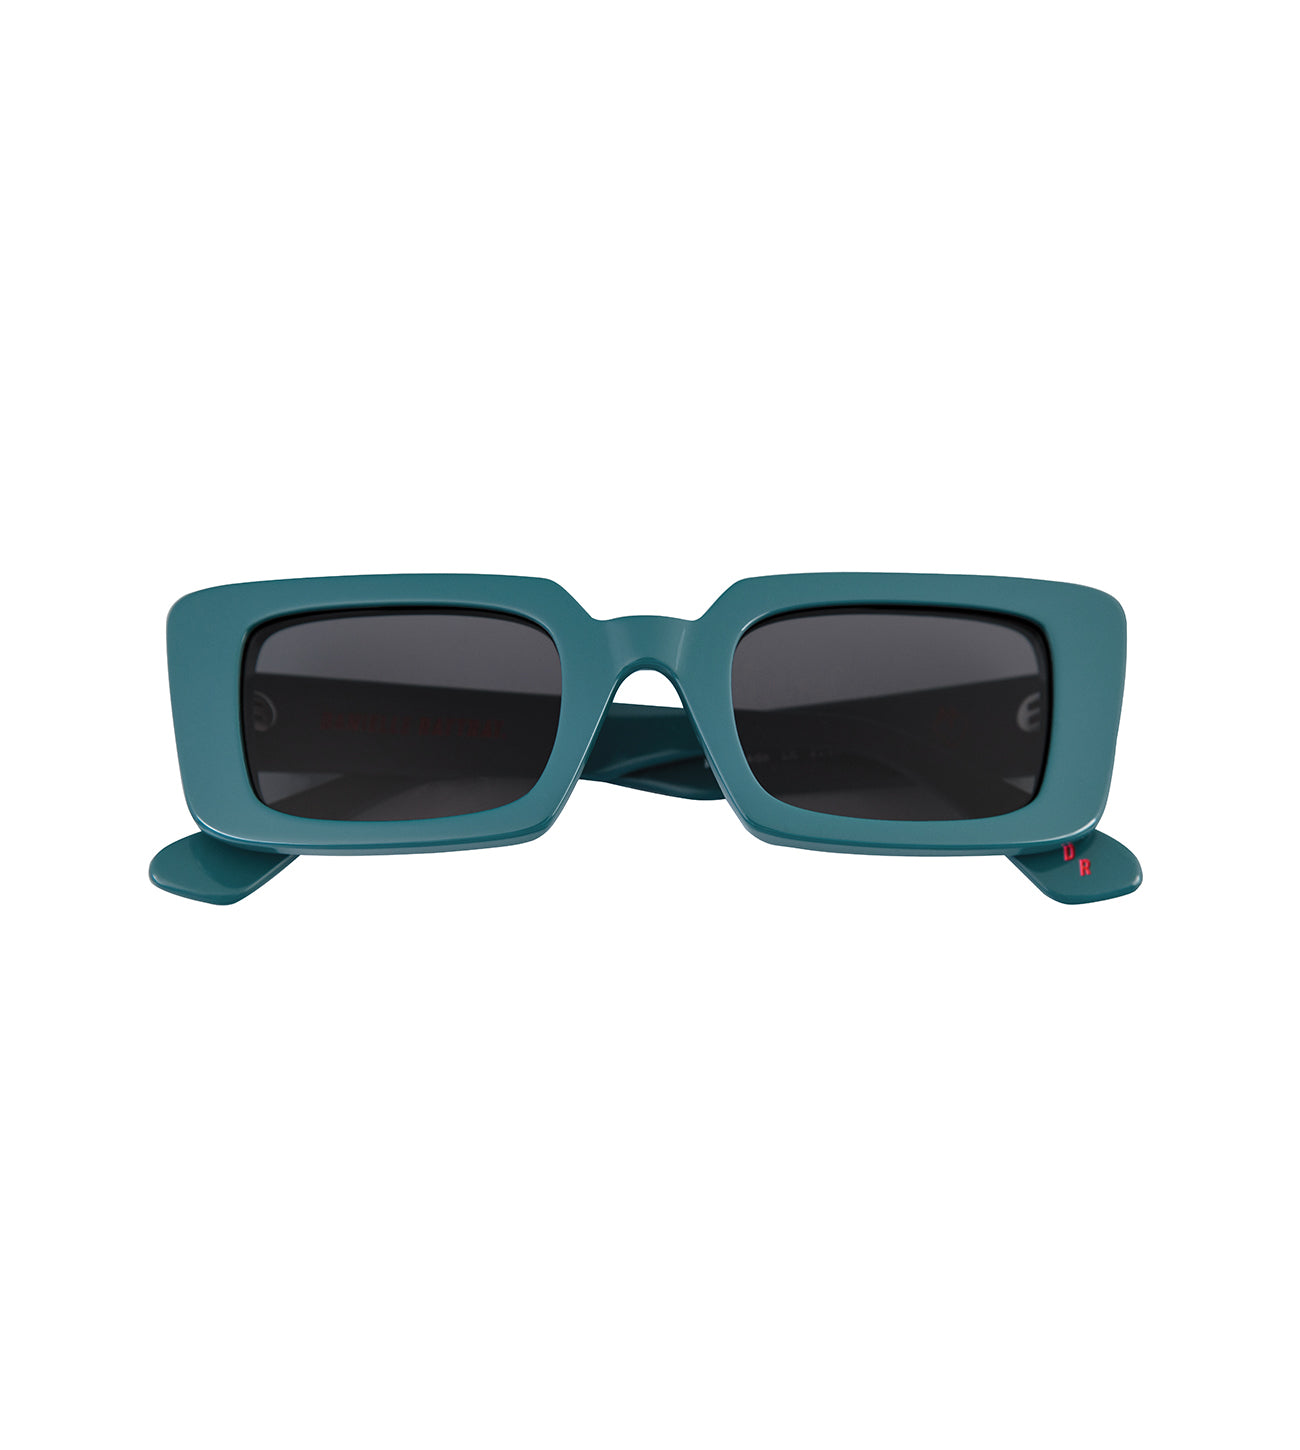 Nola Teal Sunglasses by Danielle Rattray 